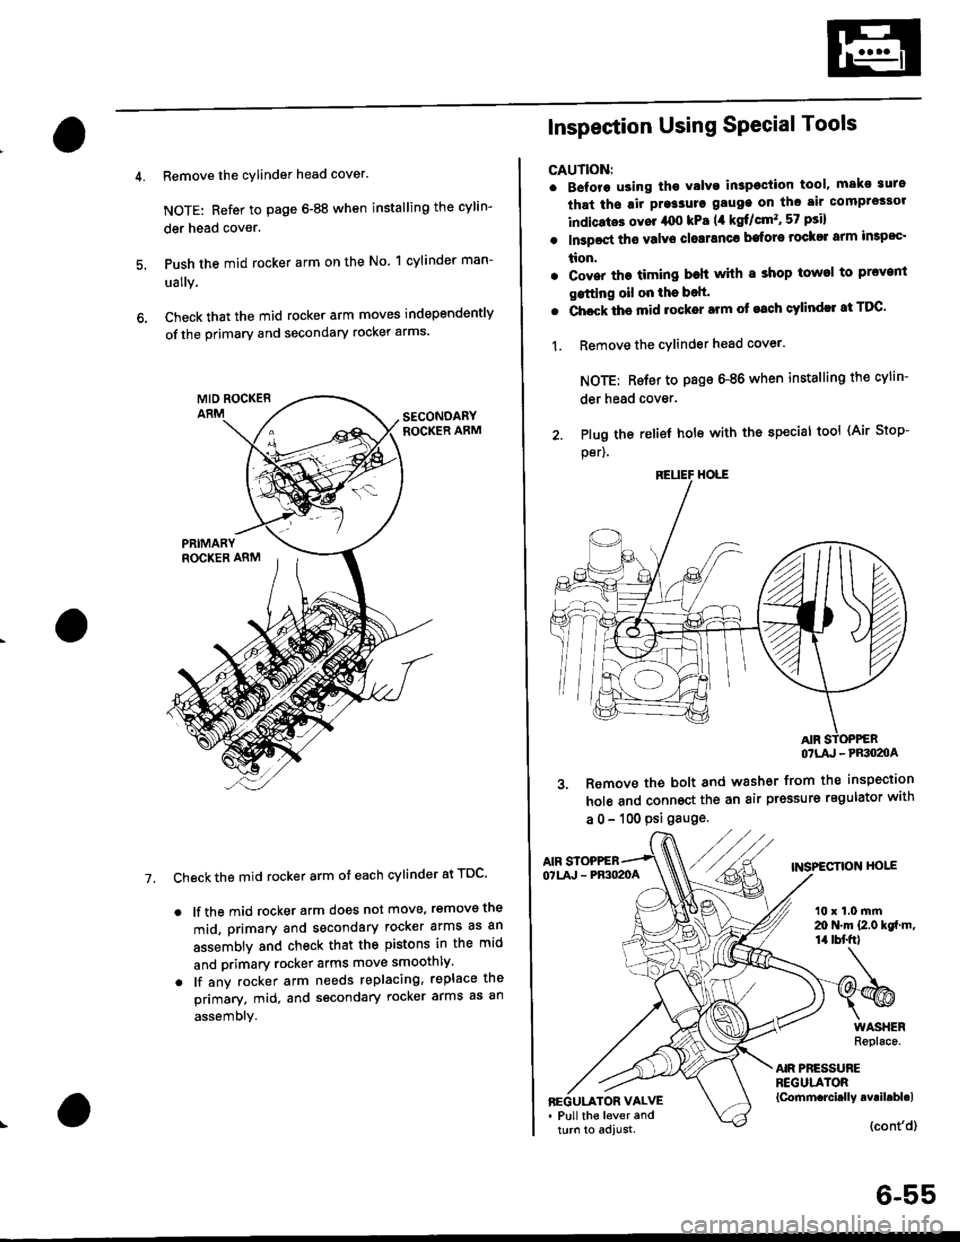 HONDA CIVIC 1996 6.G Owners Guide Remove the cylinder head cover.
NOTE: Refer to page 6-88 when installing the cylin-
der head cover.
Push the mid rocker arm on the No. 1 cylinder man-
ually.
Check that the mid rocker arm moves indepe